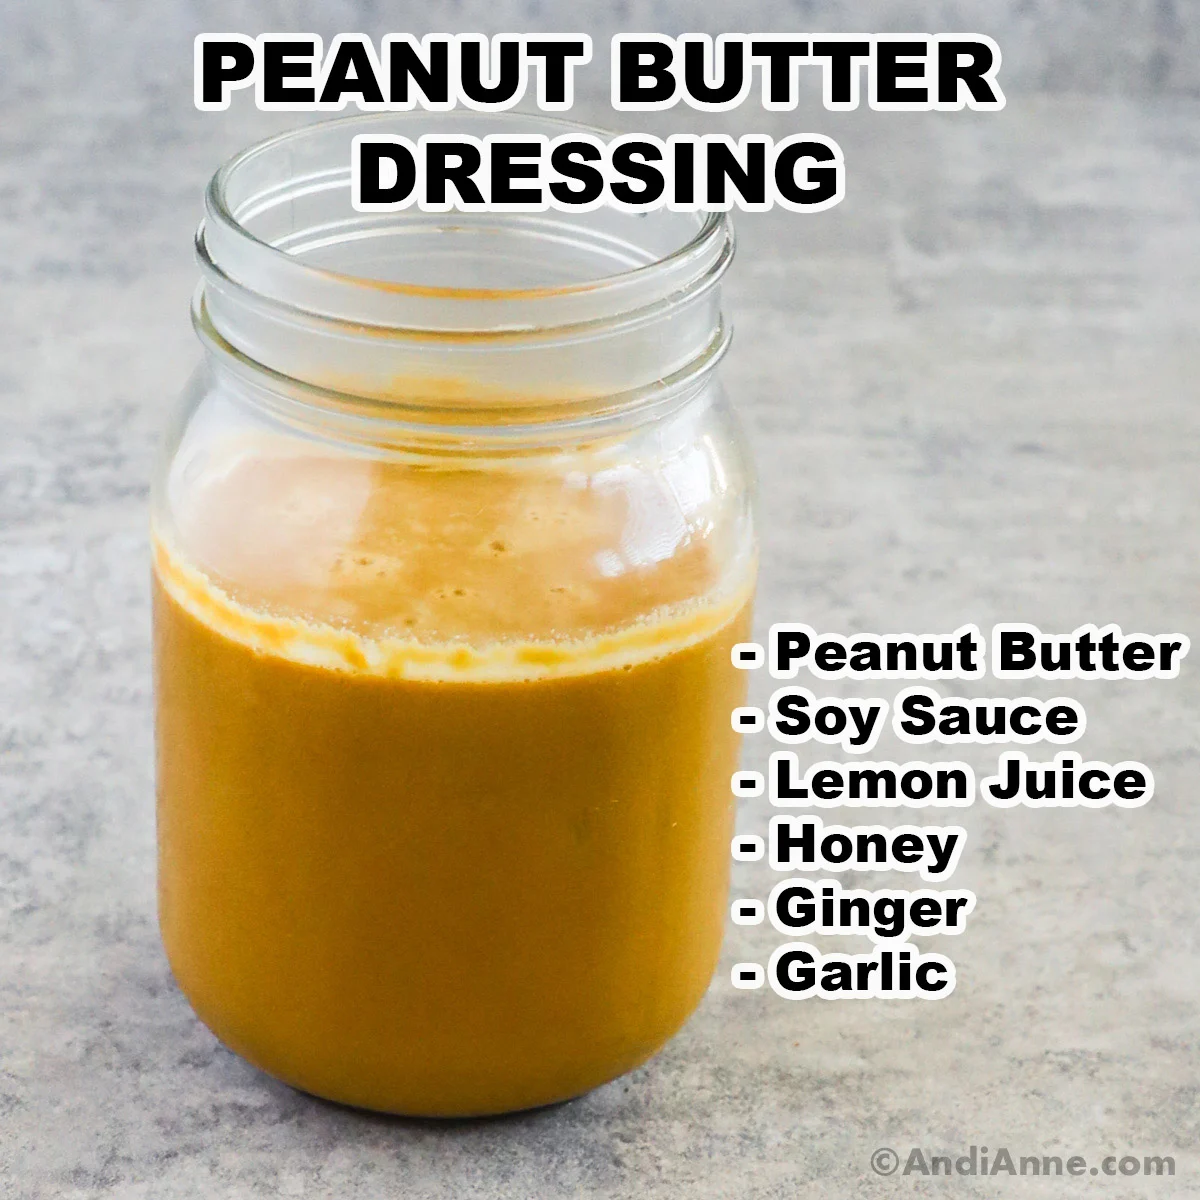 A mason jar of peanut butter dressing with ingredients listed beside including peanut butter, soy sauce, lemon juice, honey, ginger, and garlic.